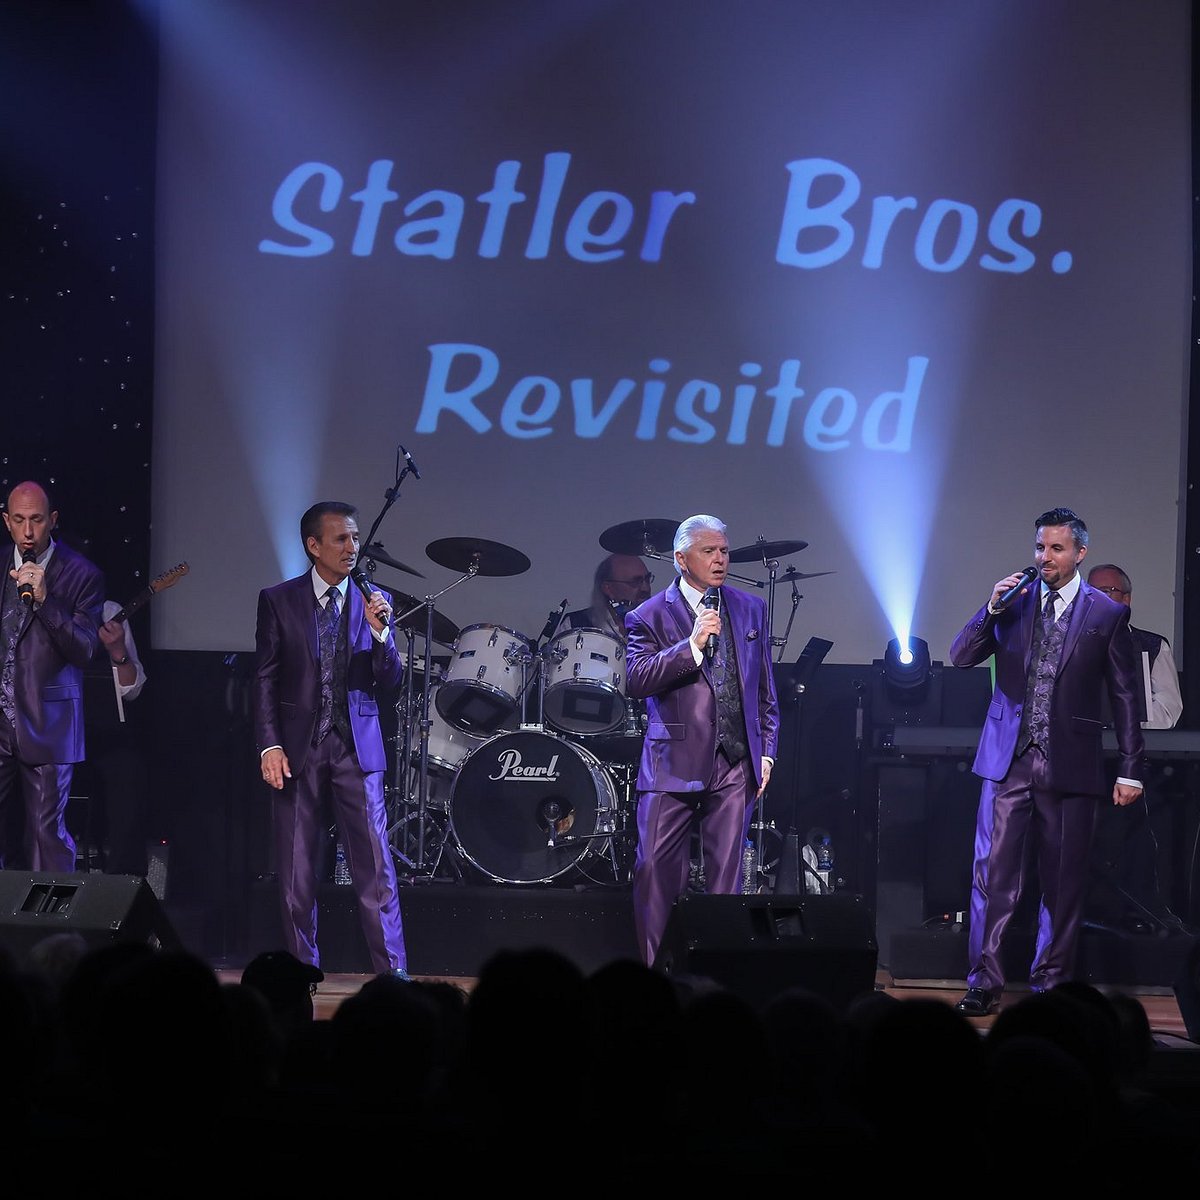 Statler Brothers Revisited at the God and Country Theatre (Branson